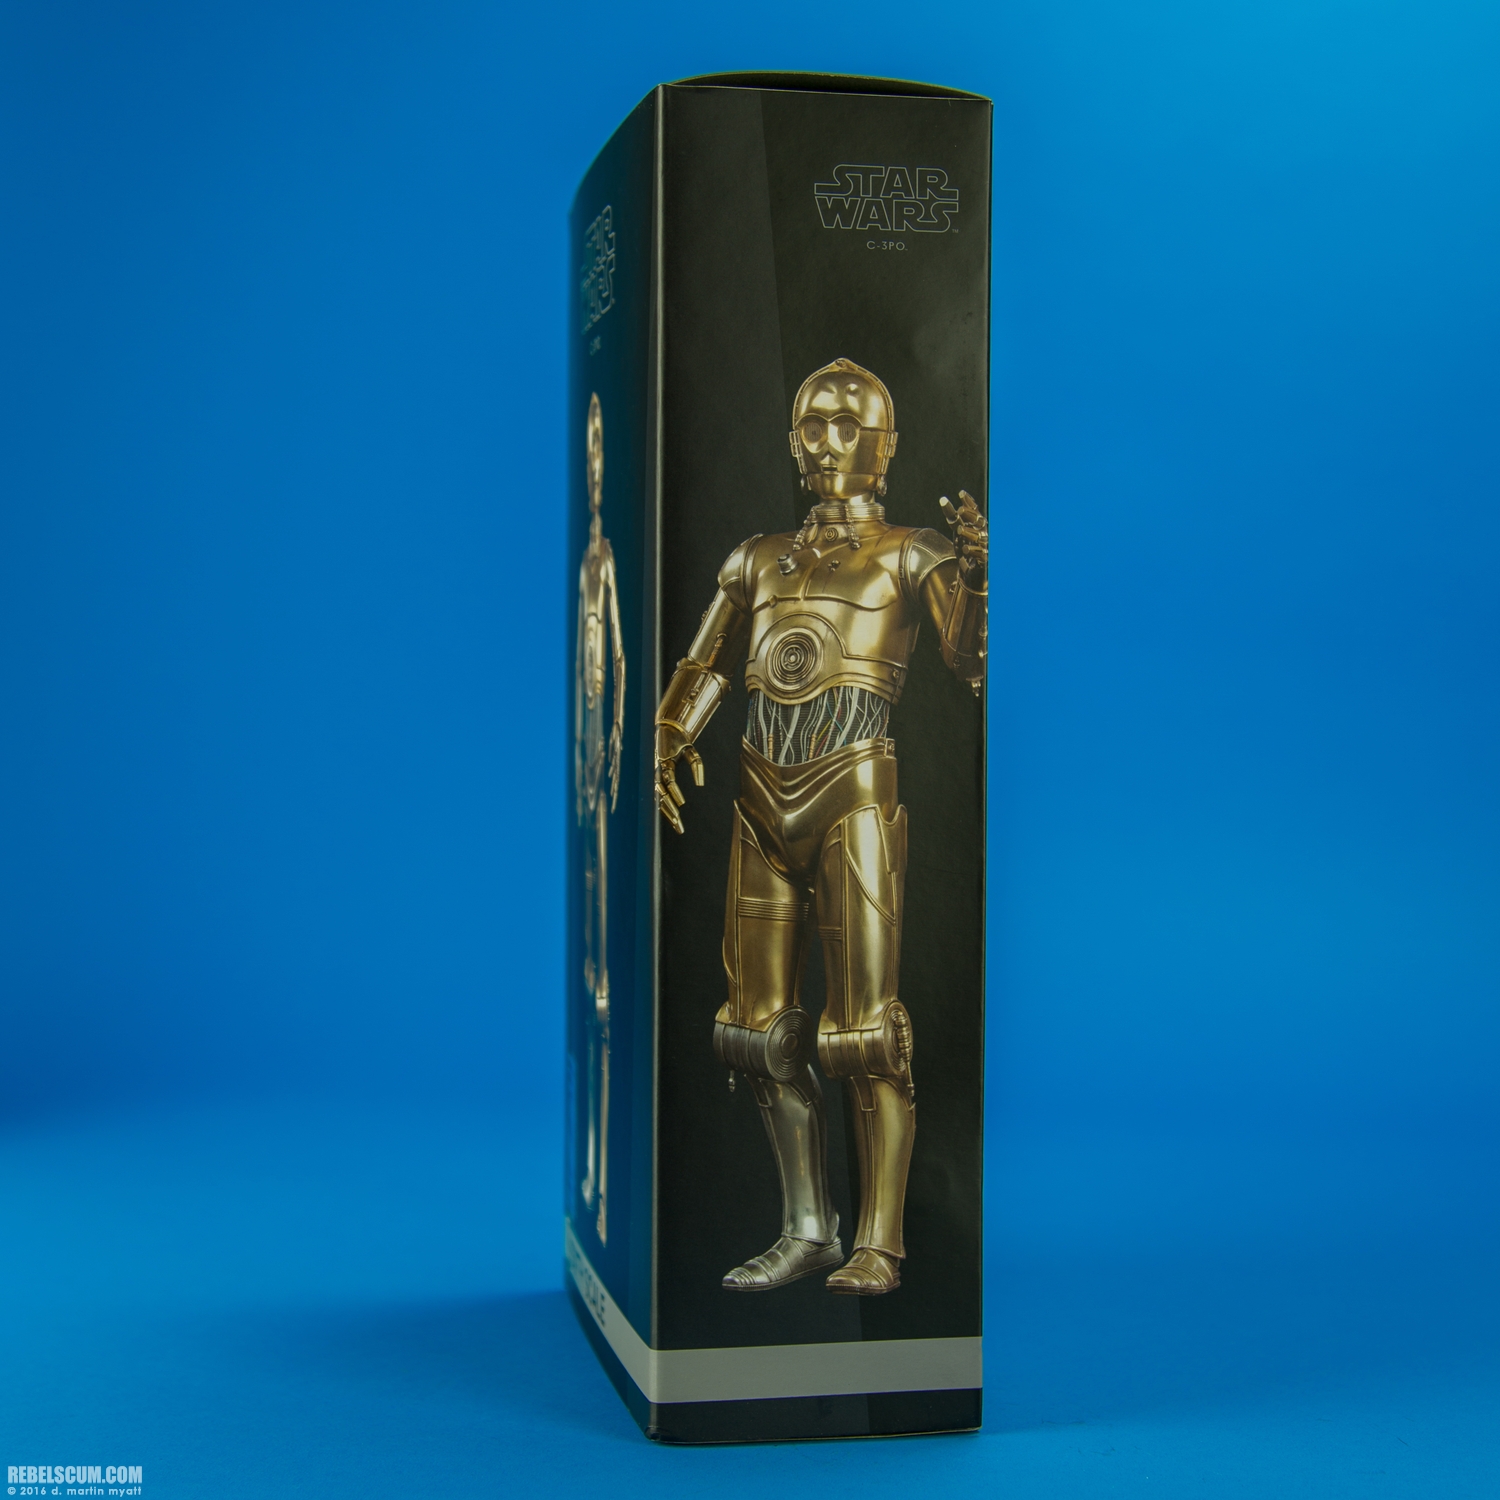 C-3PO-Sixth-Scale-Figure-Sideshow-Collectibles-025.jpg